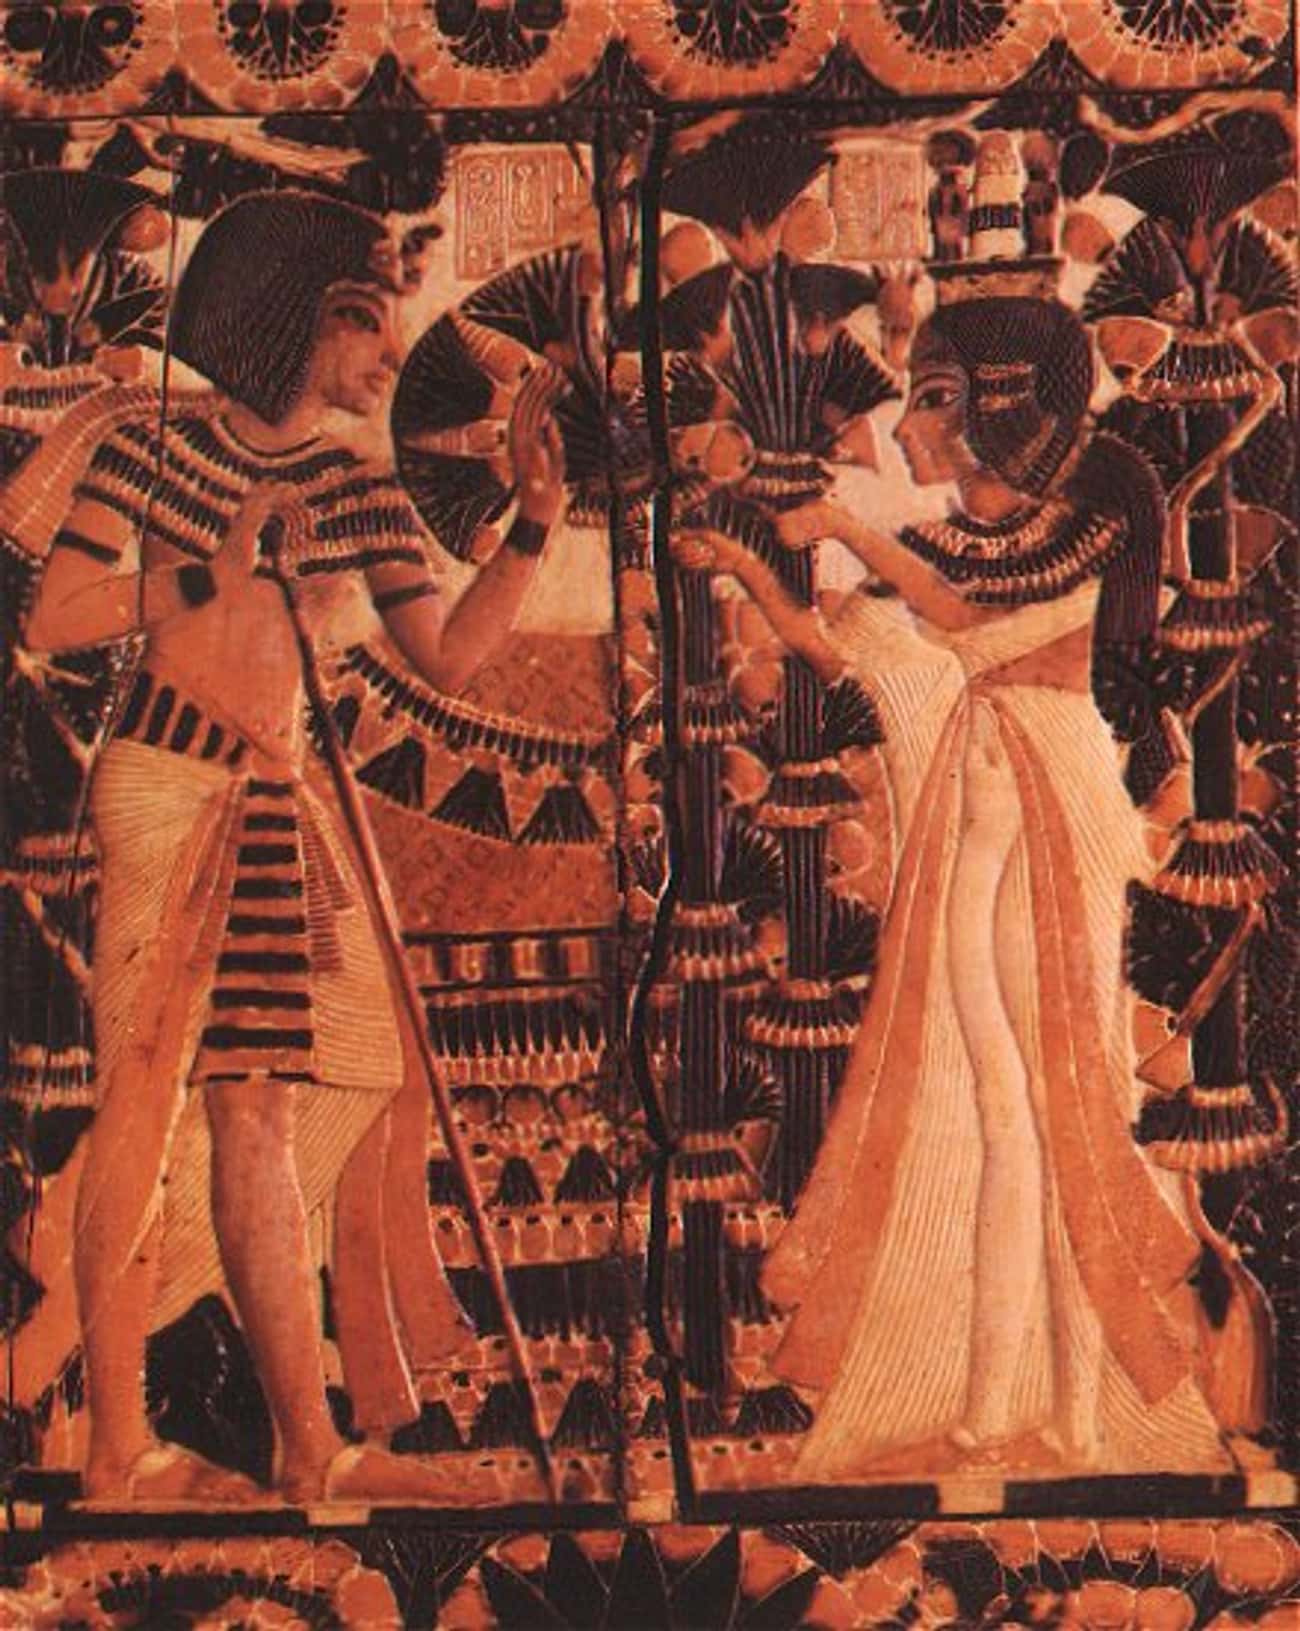  In Ancient Egypt, King Tut Was Buried With Triangular Fabric Loincloths